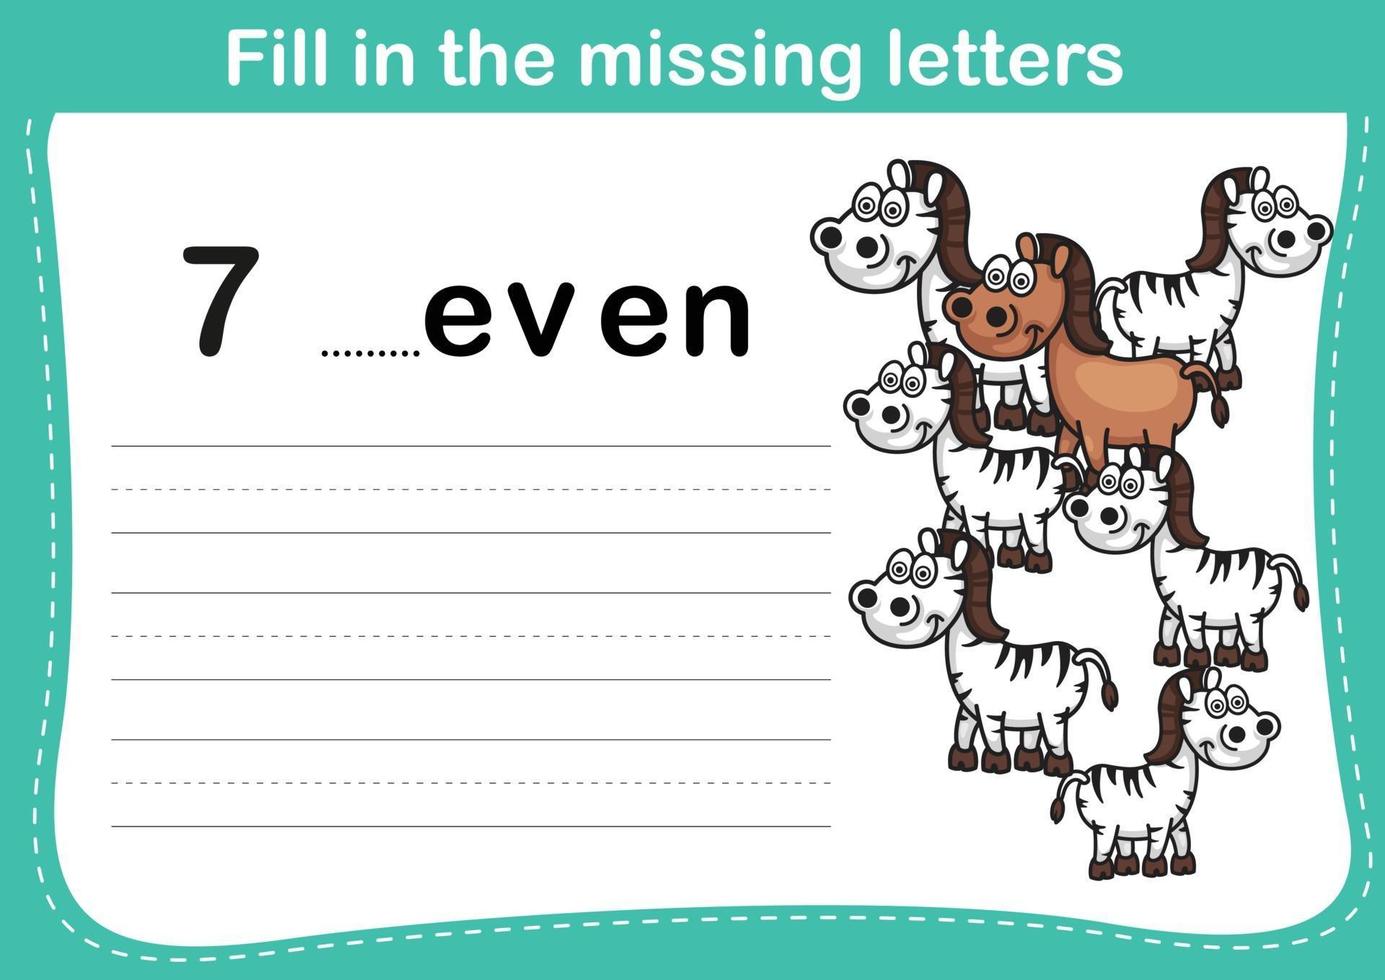 Fill in the missing letters vector